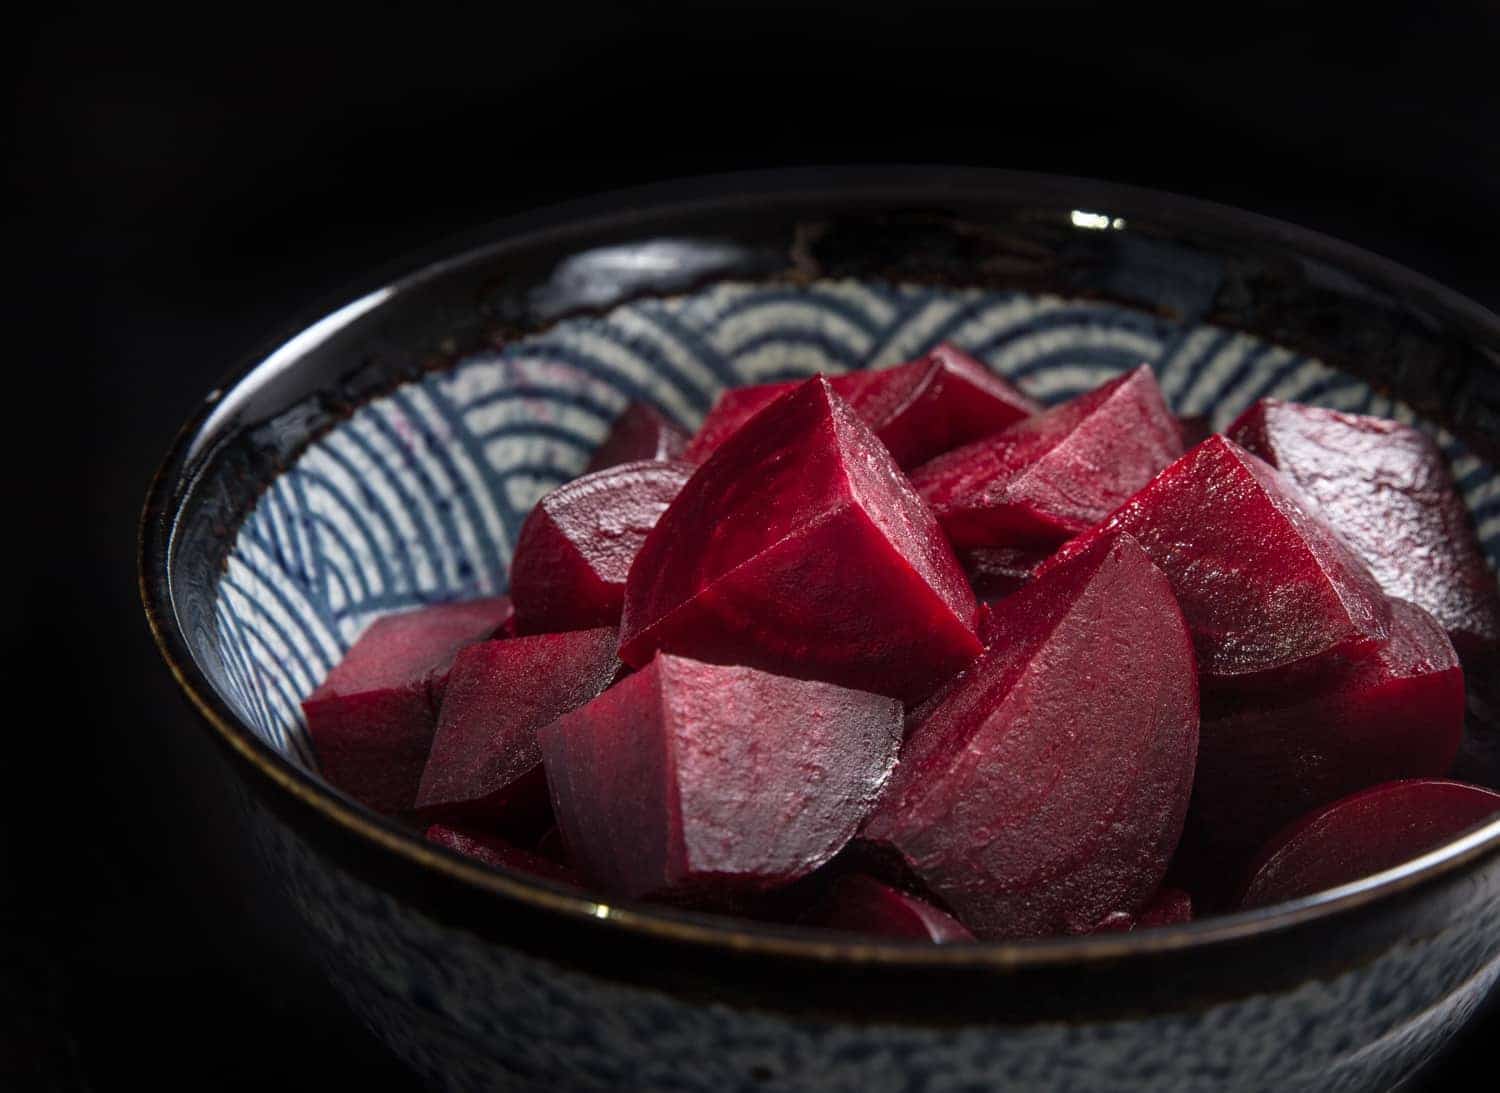 Make Instant Pot Beets Recipe (Pressure Cooker Beets): super easy to make for salads, soups, pickled snacks, desserts, puree, smoothies. Gluten-free, paleo, whole food, vegetarian, vegan.